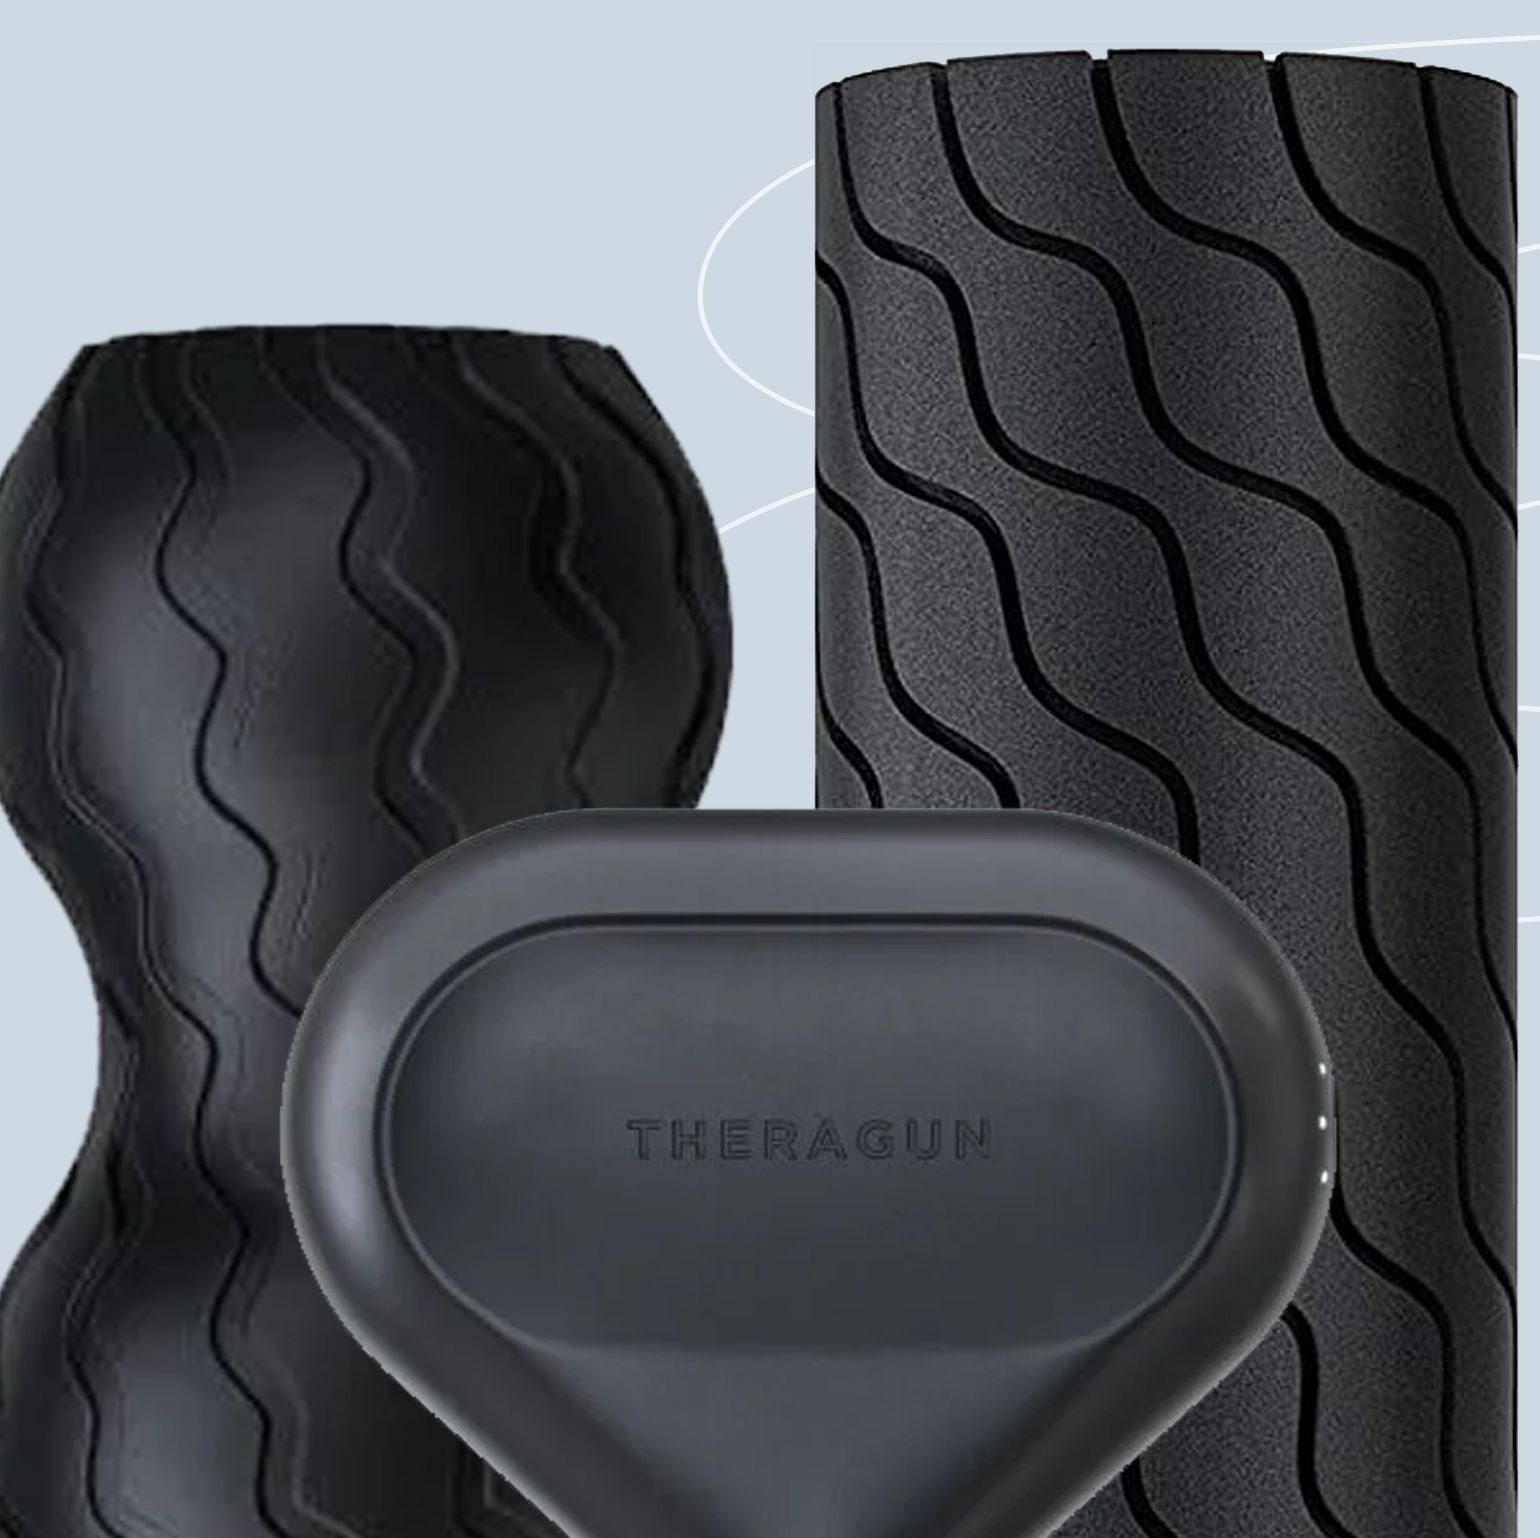 Therabody's Black Friday Deals Will Let You Rehab Your Whole Body For Less